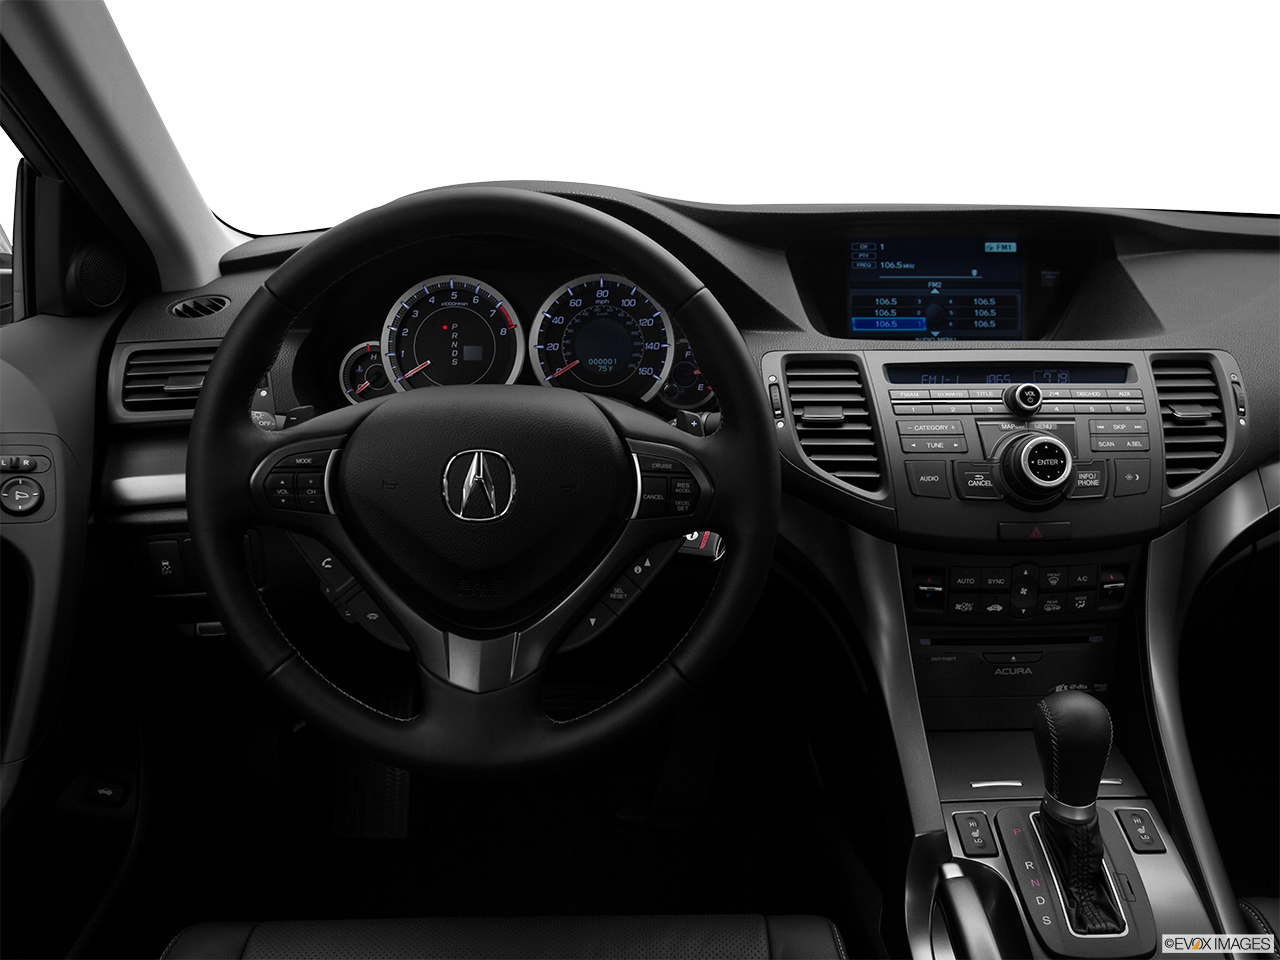 2012 Acura TSX 5-Speed Automatic Steering wheel/Center Console. 